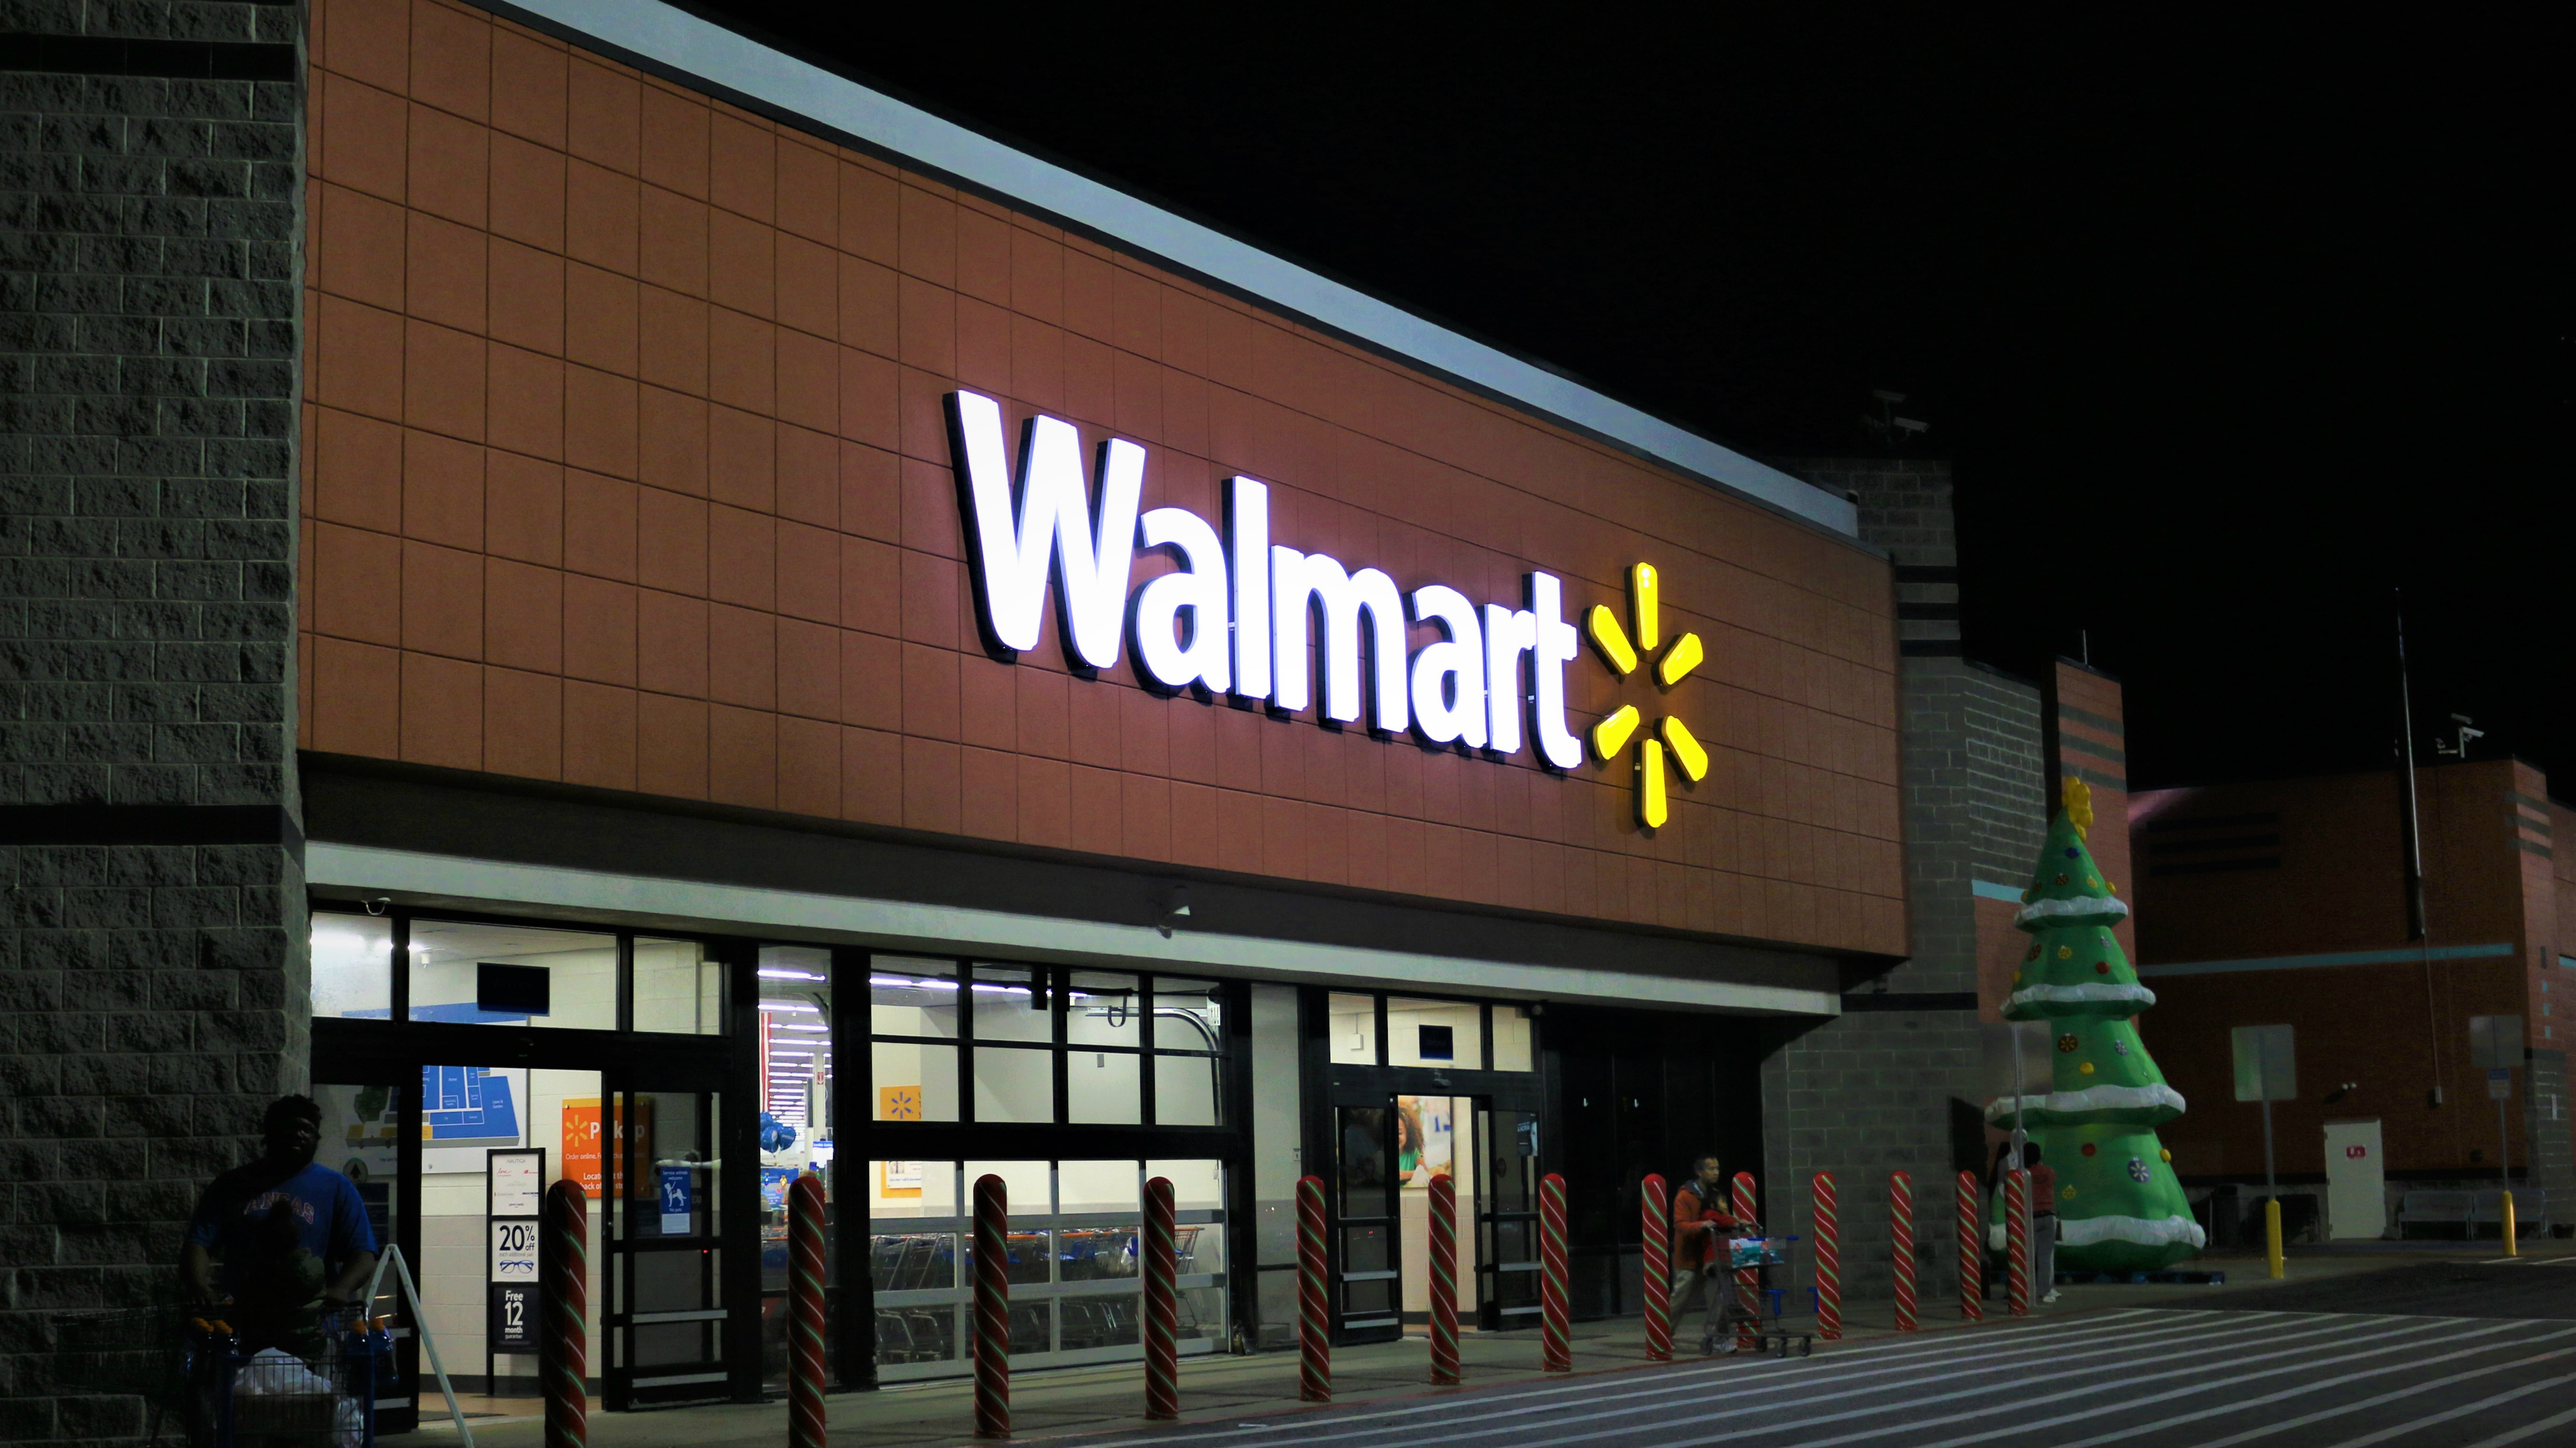 An image of a Walmart store at night